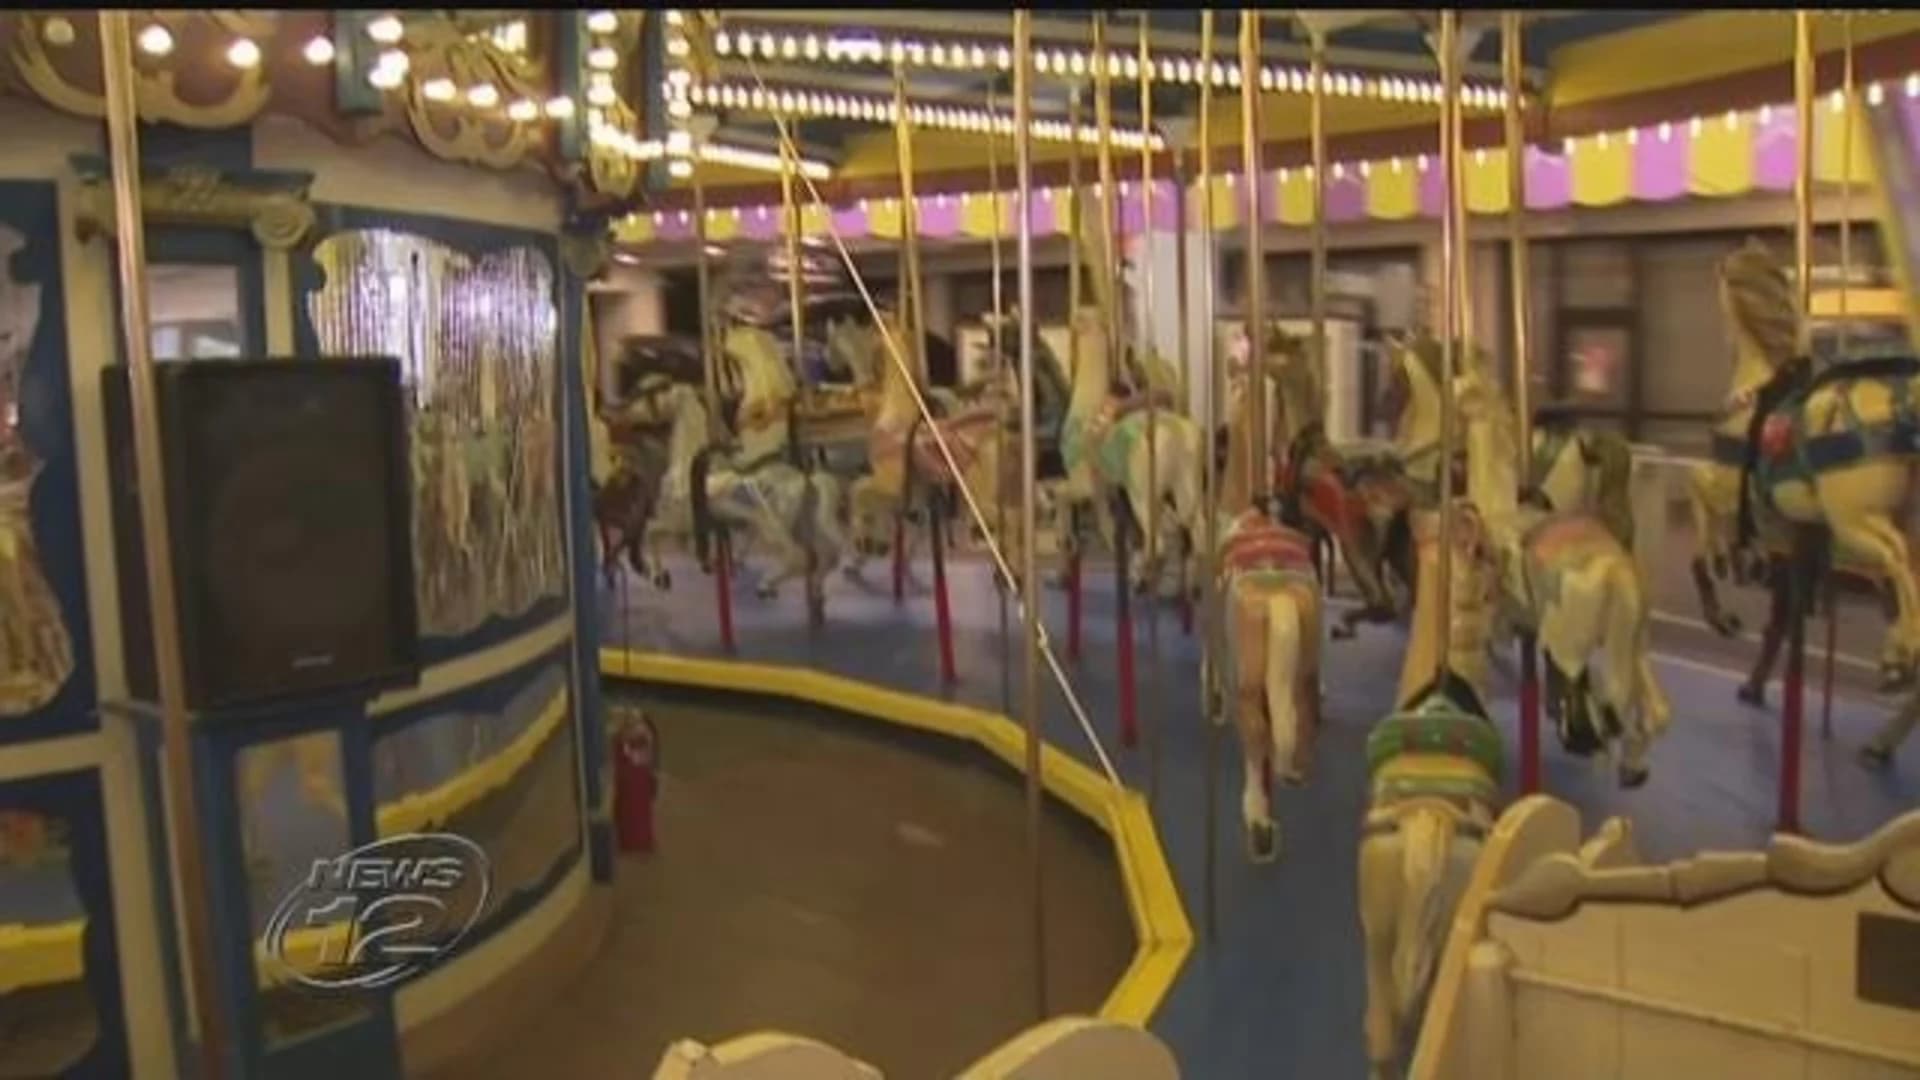 Casino Pier Carousel to be disassembled after 87 years